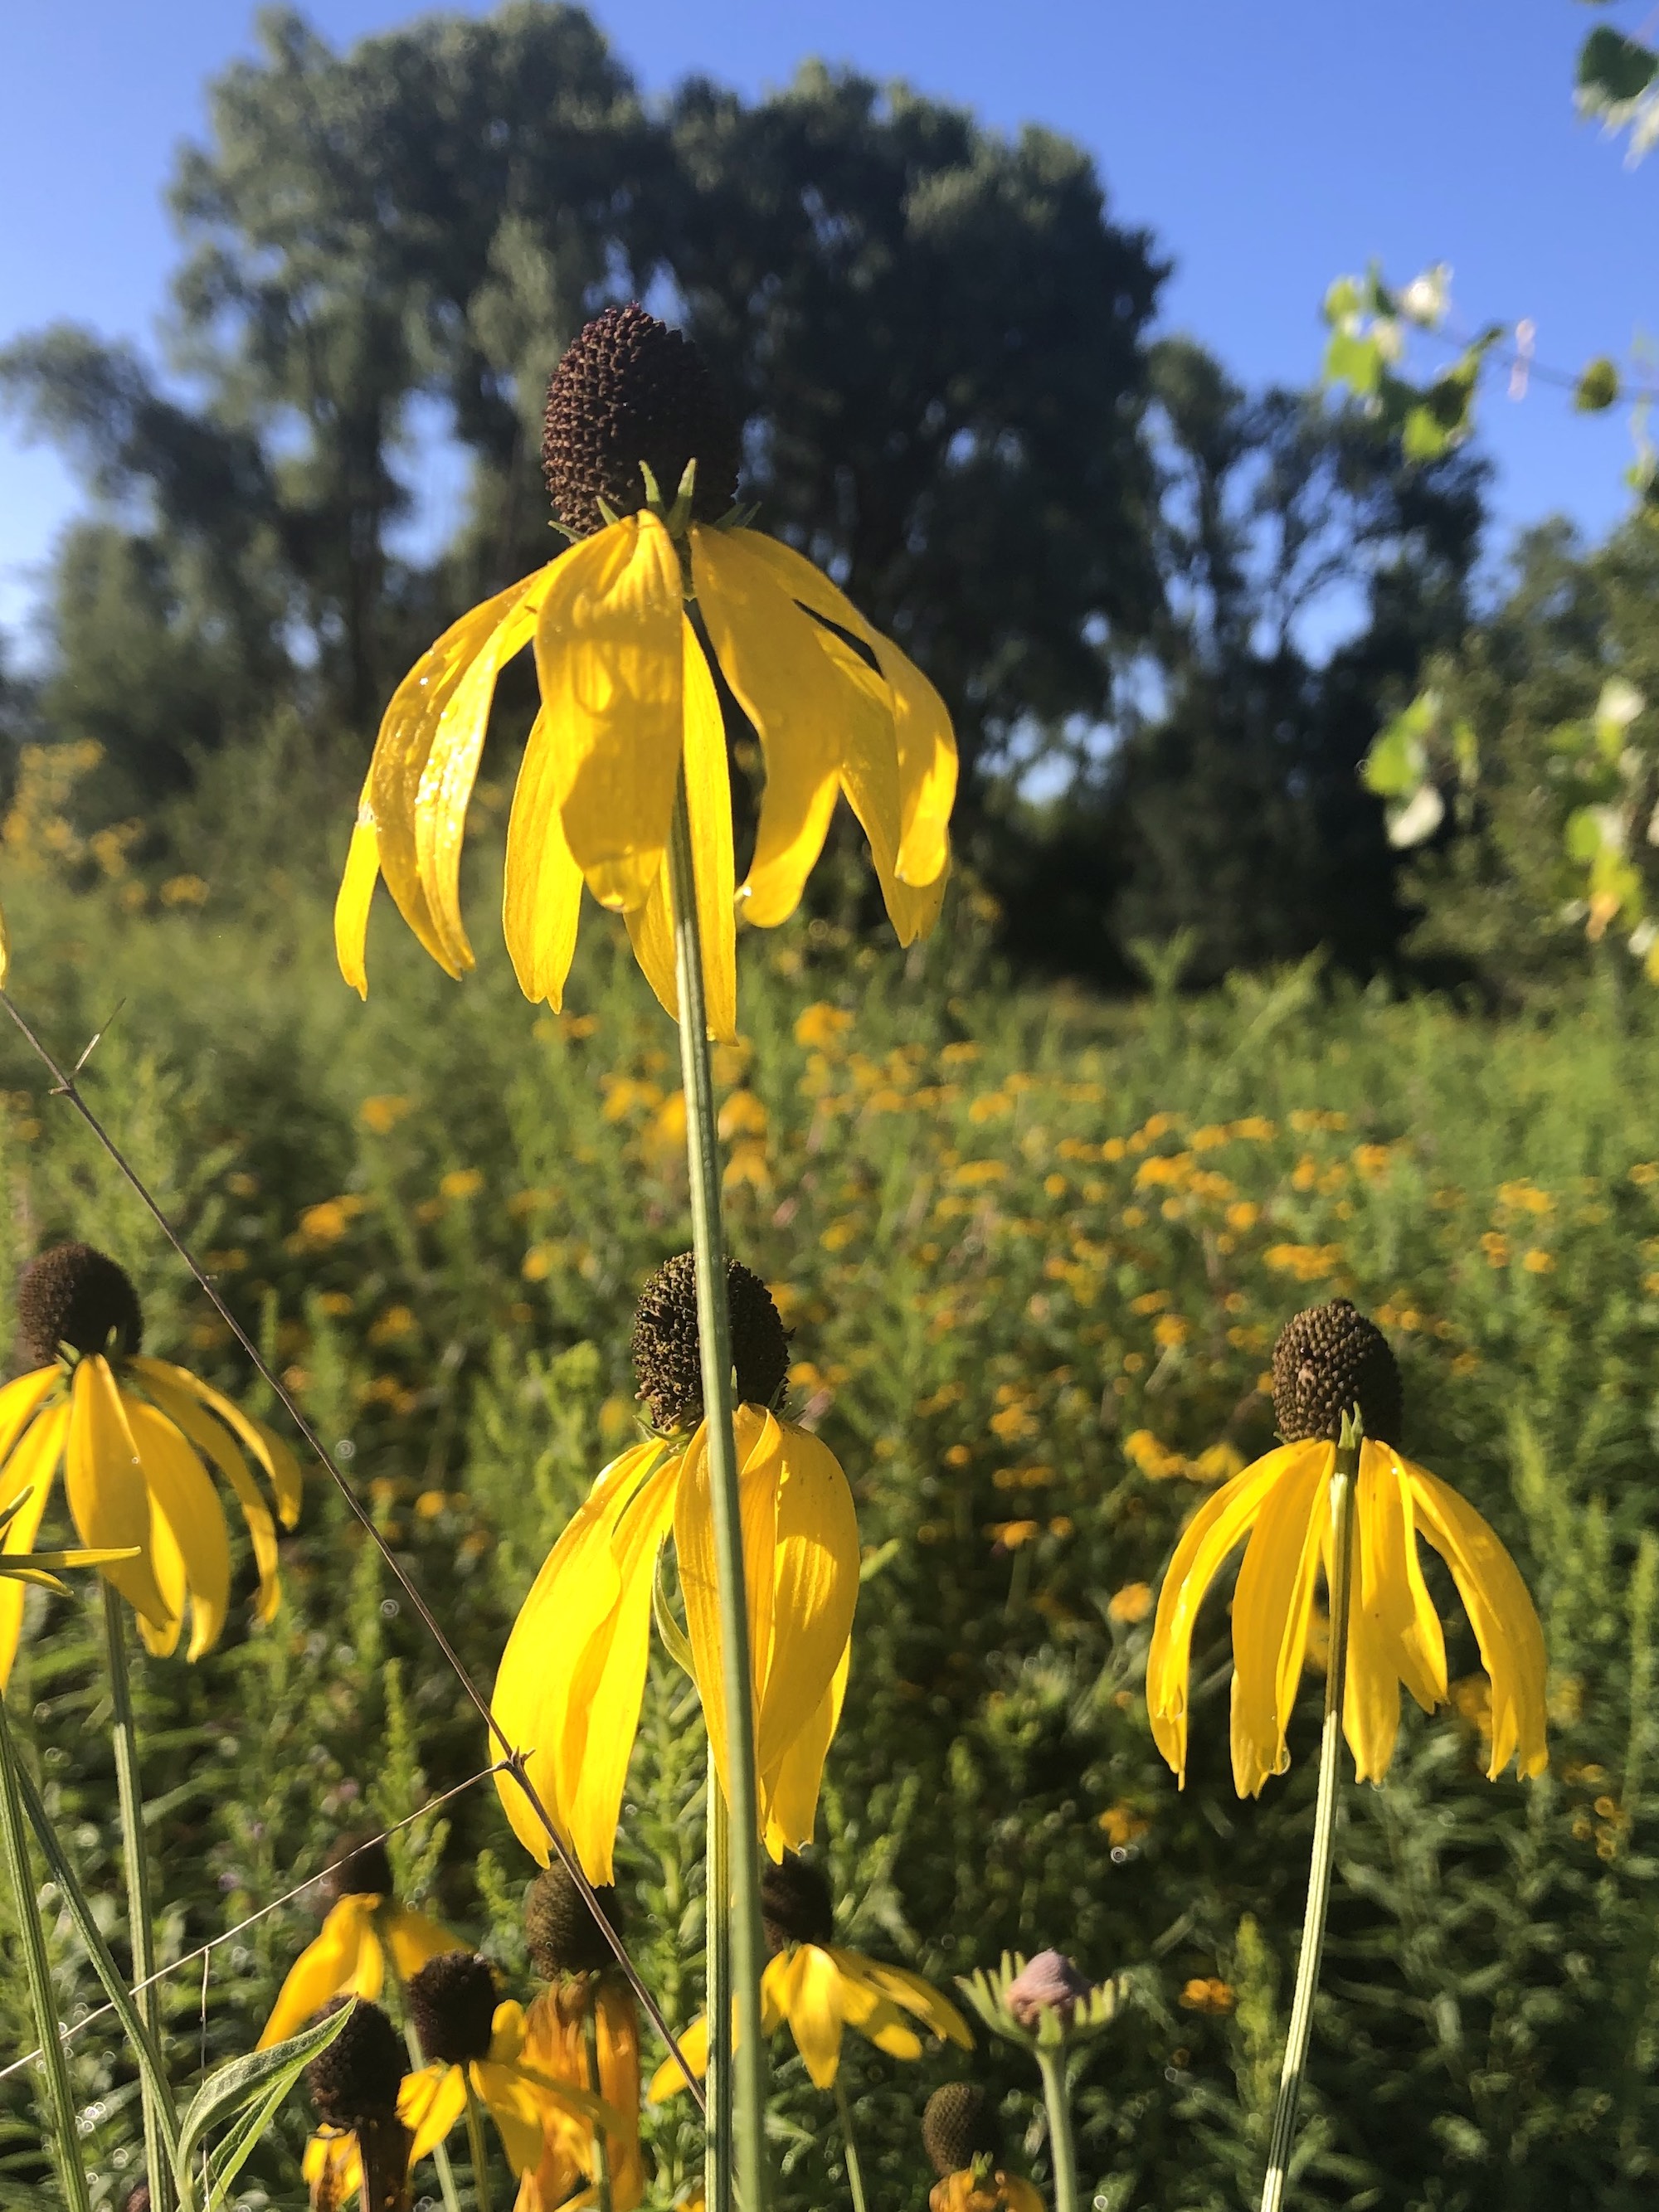 Gray-headed coneflower on shore of Marion Dunn Pond in Madison, Wisconsin on August 11, 2020.